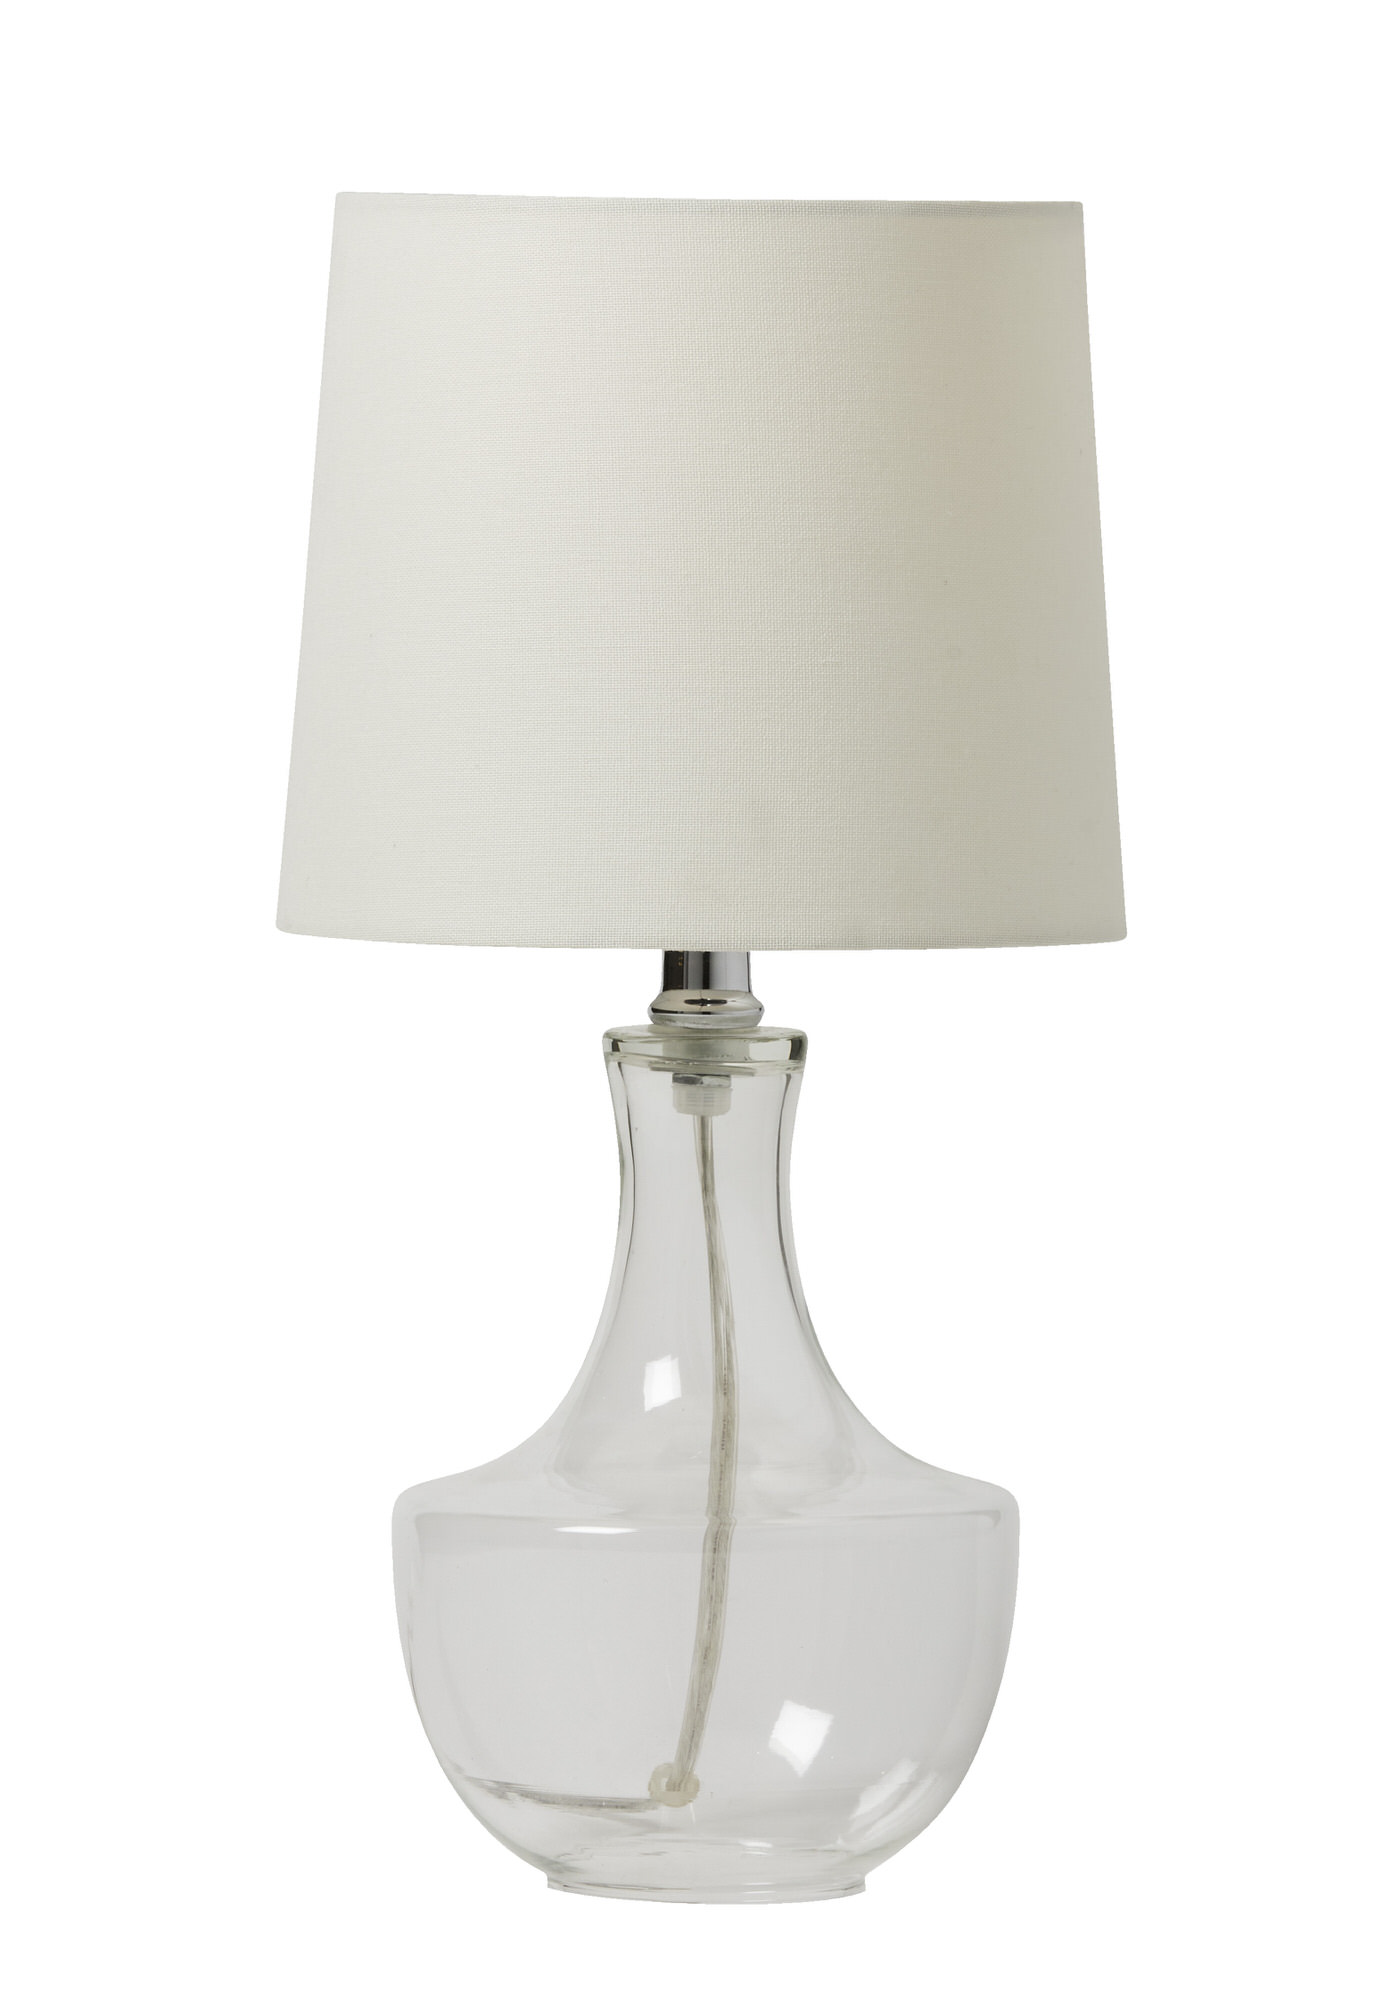 Craftmade 86255 1 Light Clear Glass Base Table Lamp in Brushed Polished Nickel